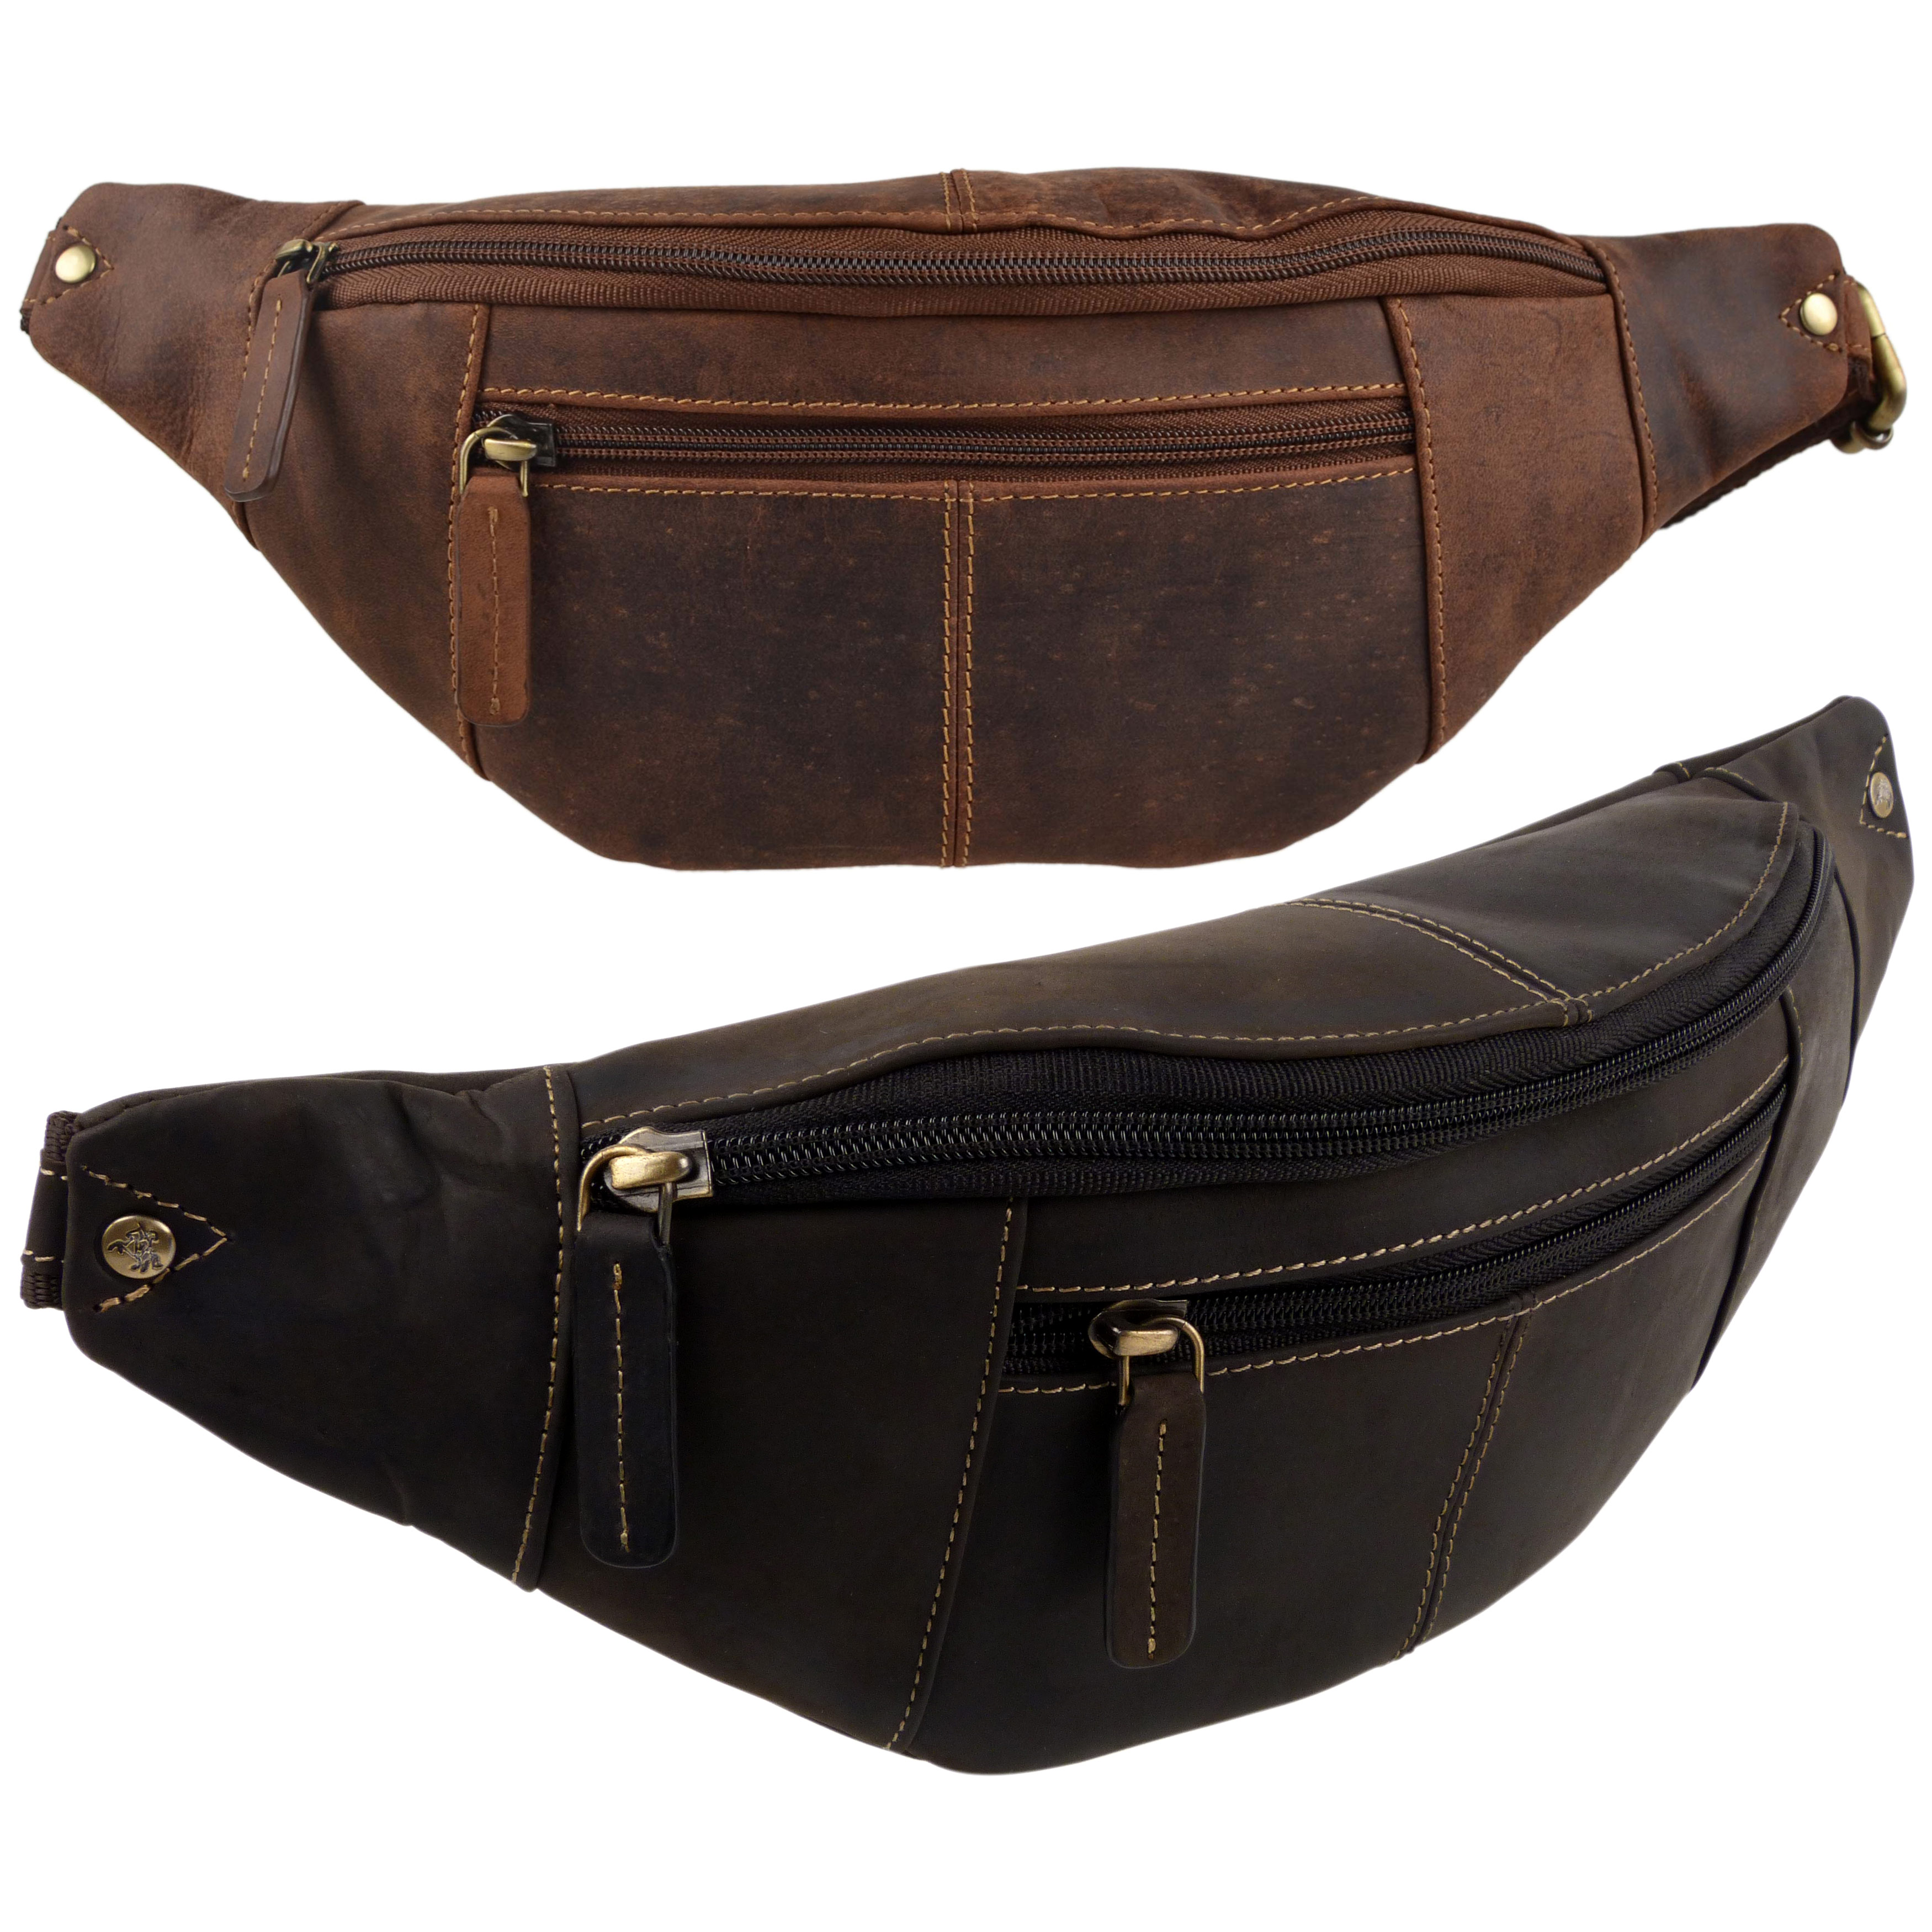 Oil Leather Waist Bum Bag by Visconti Fanny Pack Top Quality Travel Handy | eBay